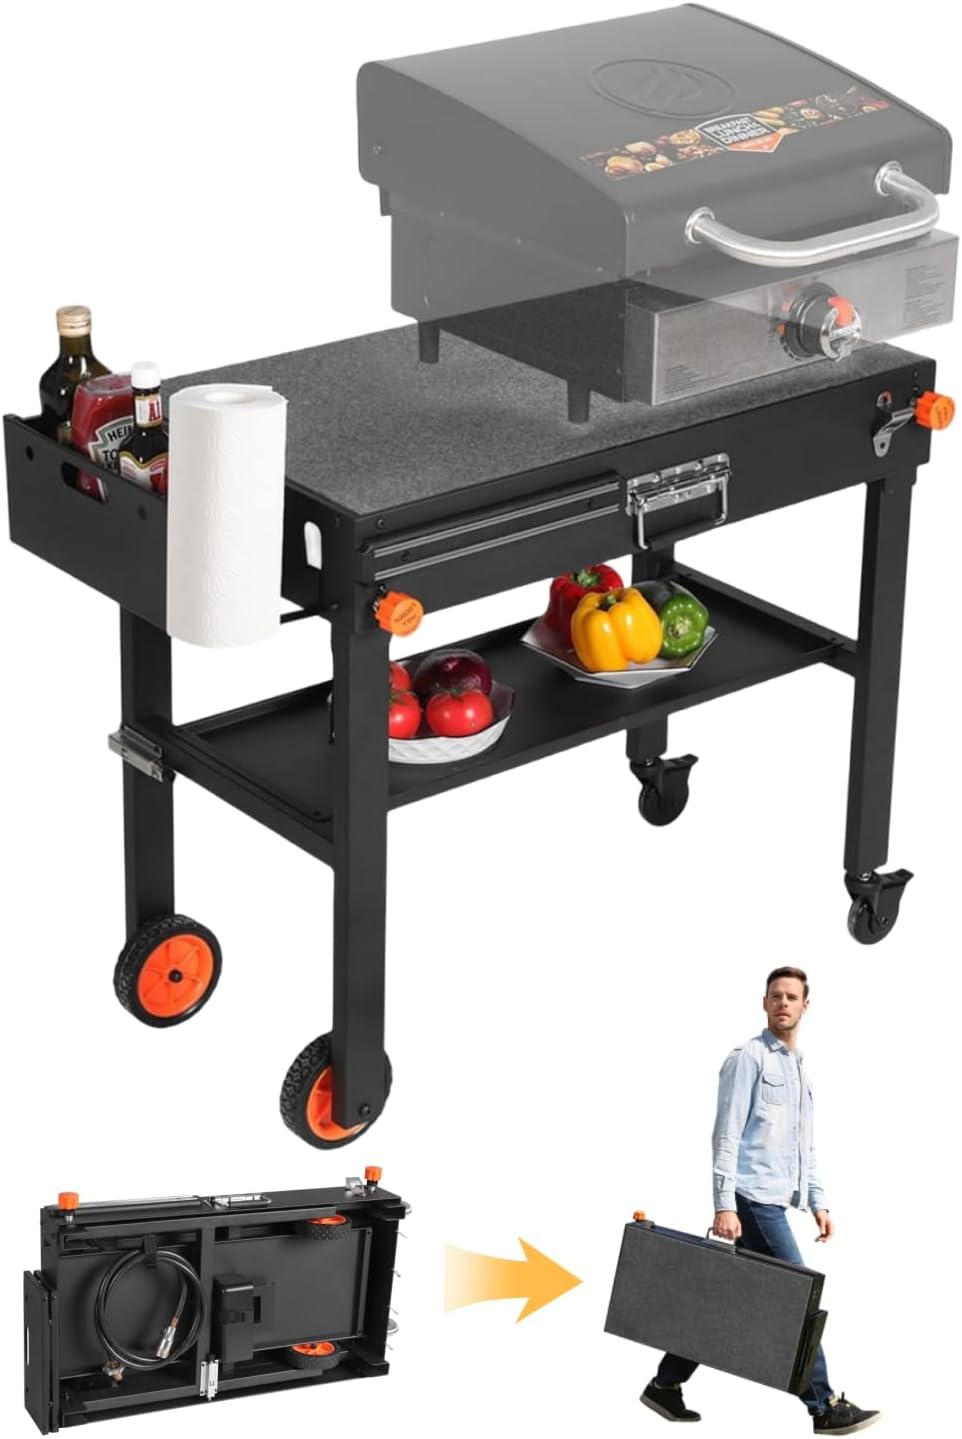 Limited-Time Promo: JiRiCHMi Outdoor Grill Table - Hot Savings Alert - Shop Now for the Best Deals!